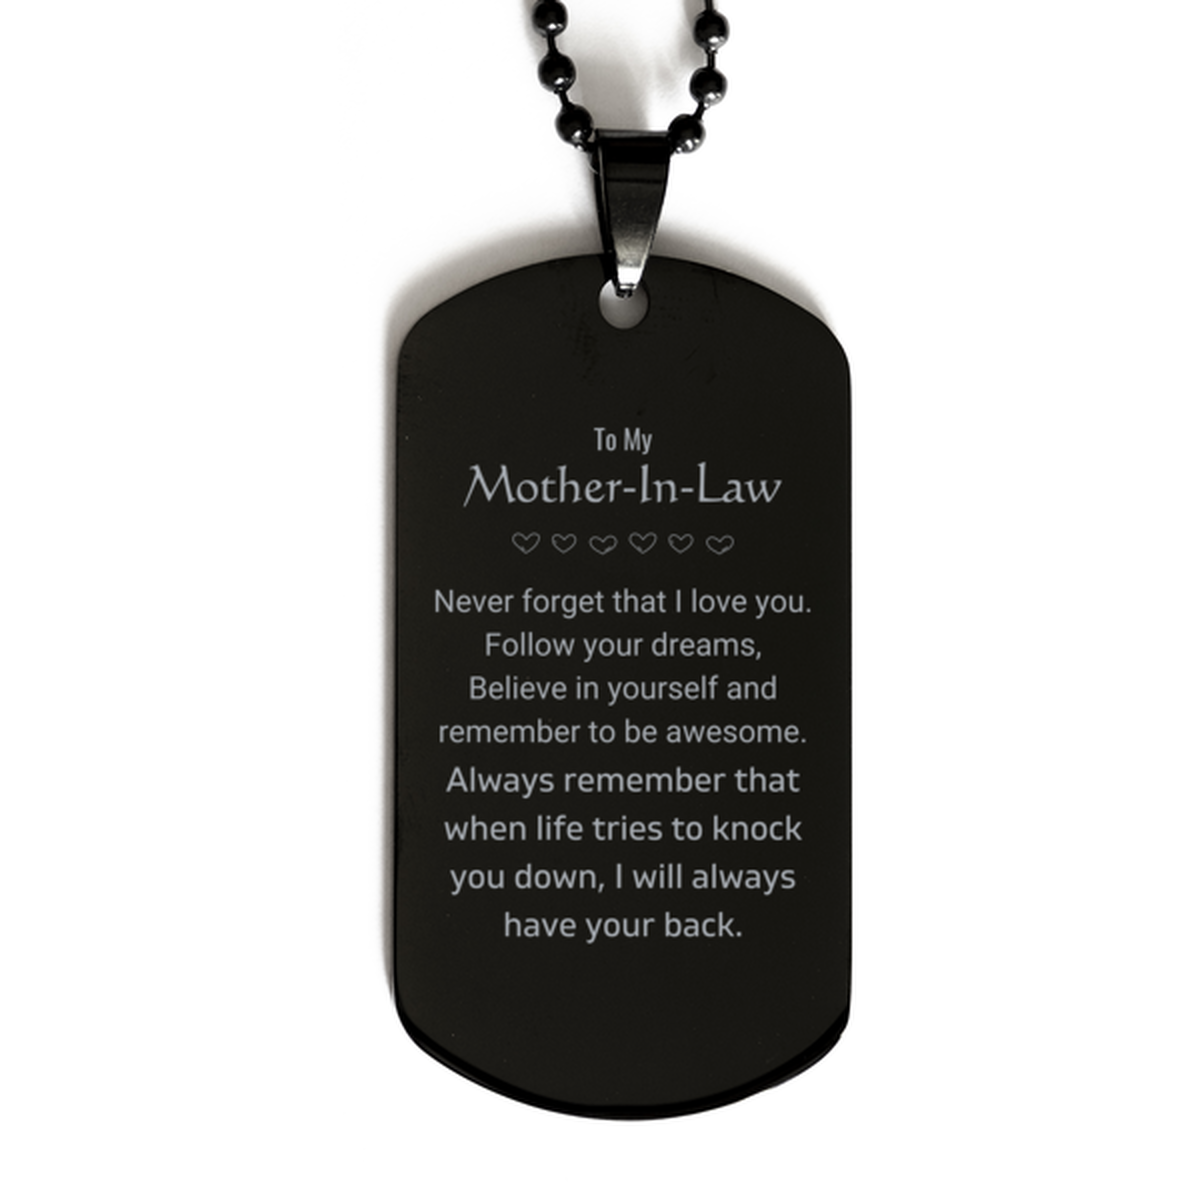 Inspirational Gifts for Mother-In-Law, Follow your dreams, Believe in yourself, Mother-In-Law Black Dog Tag, Birthday Christmas Unique Gifts For Mother-In-Law